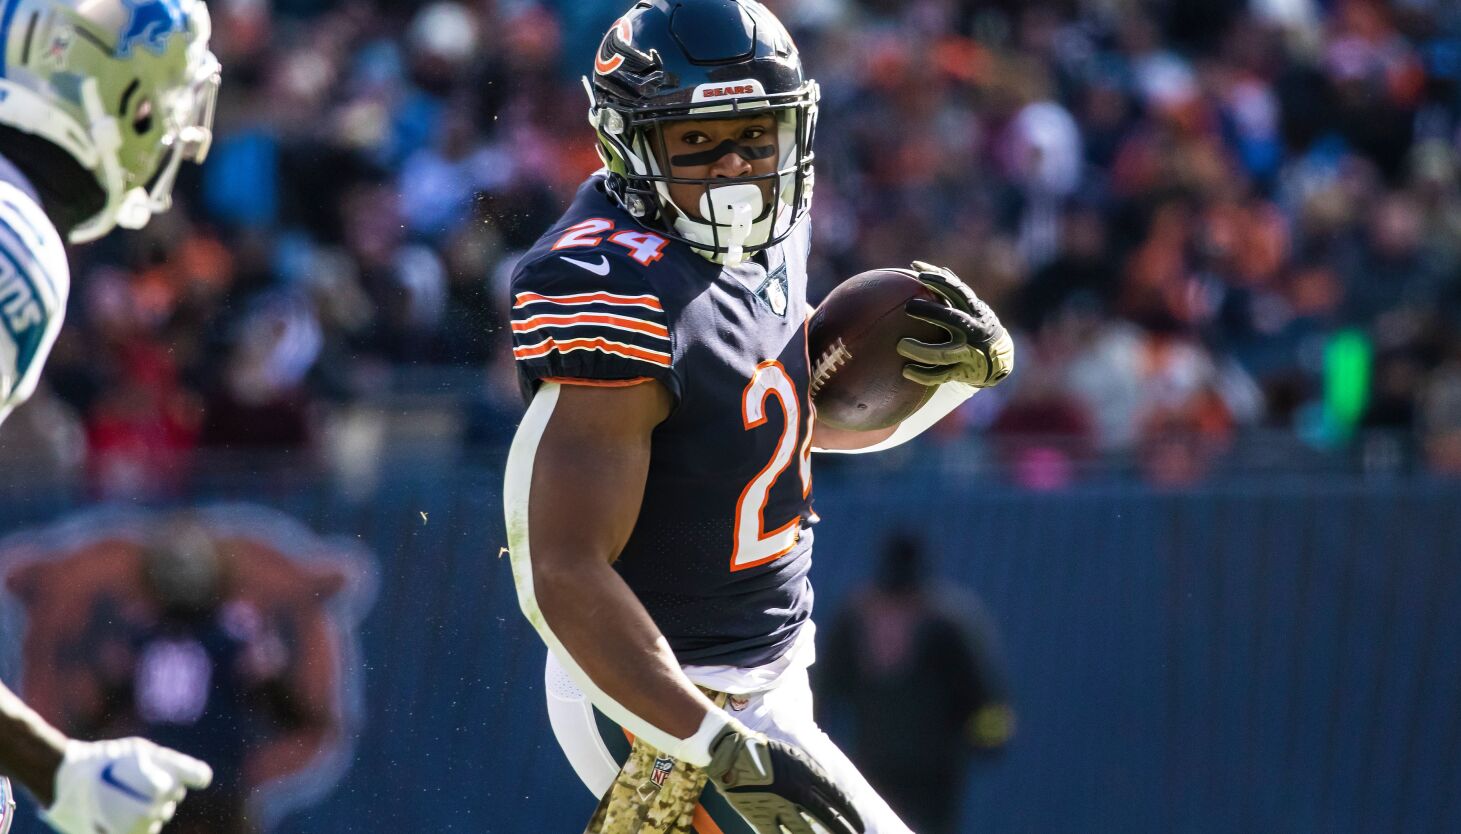 The Bears look to RB Khalil Herbert as they continue without David Montgomery